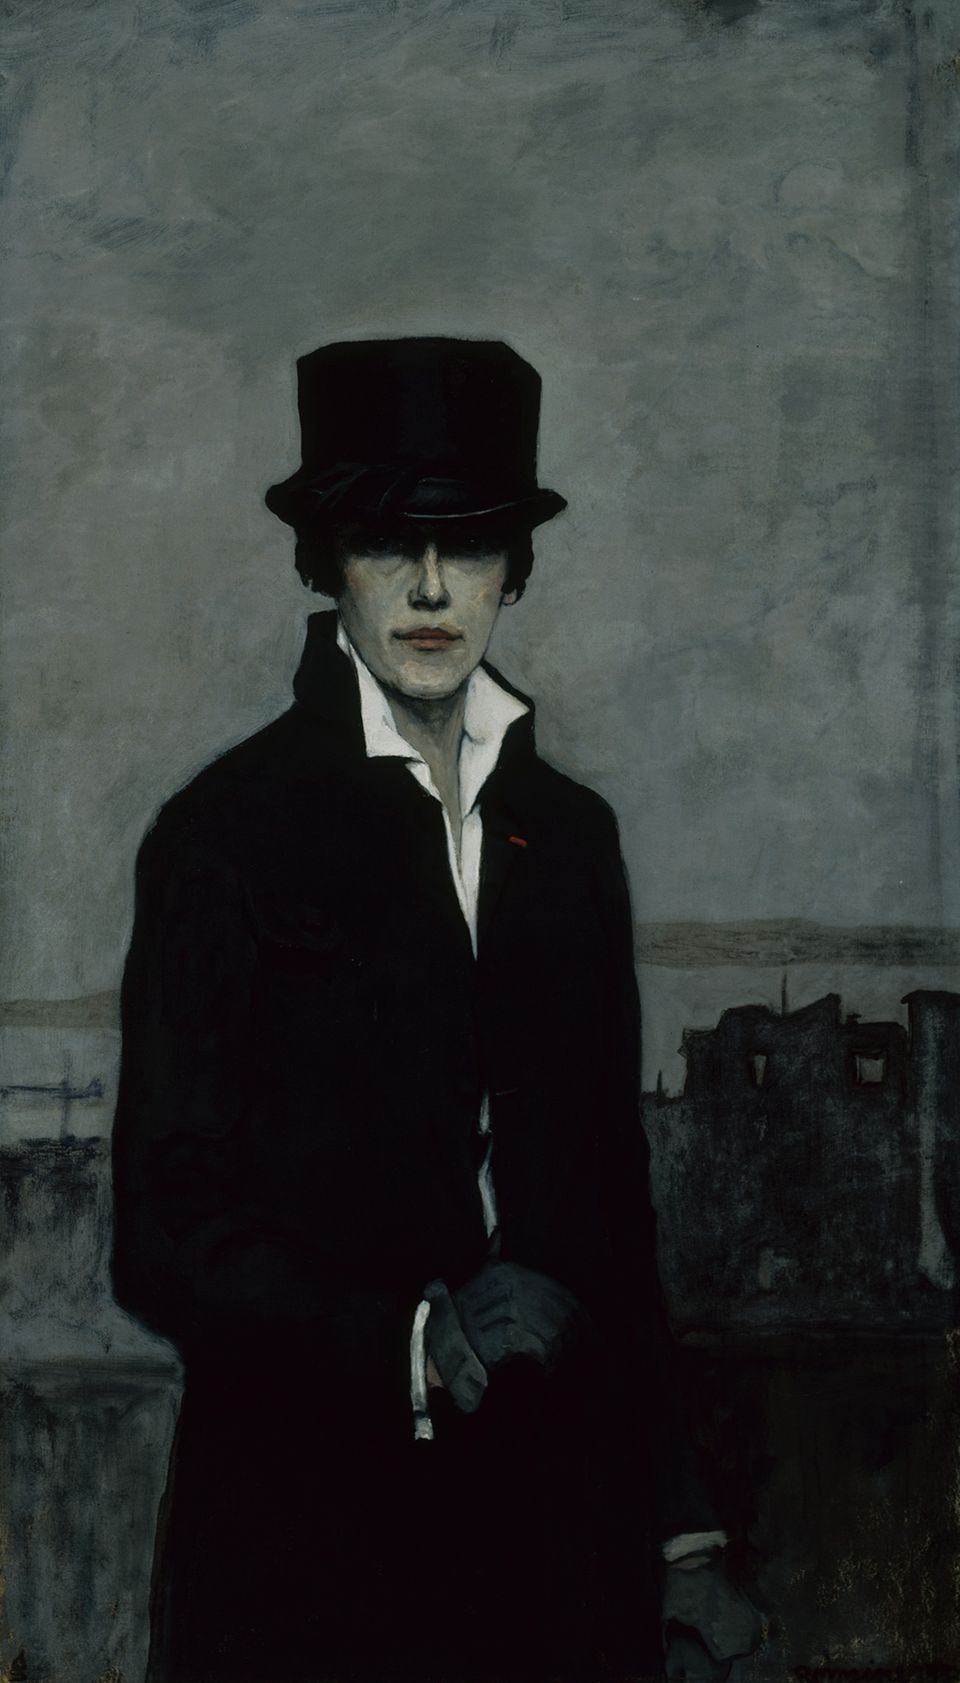 Romaine Brooks' Self-Portrait is a self portrait of the artist wearing a top hat, black jacket and black gloves.